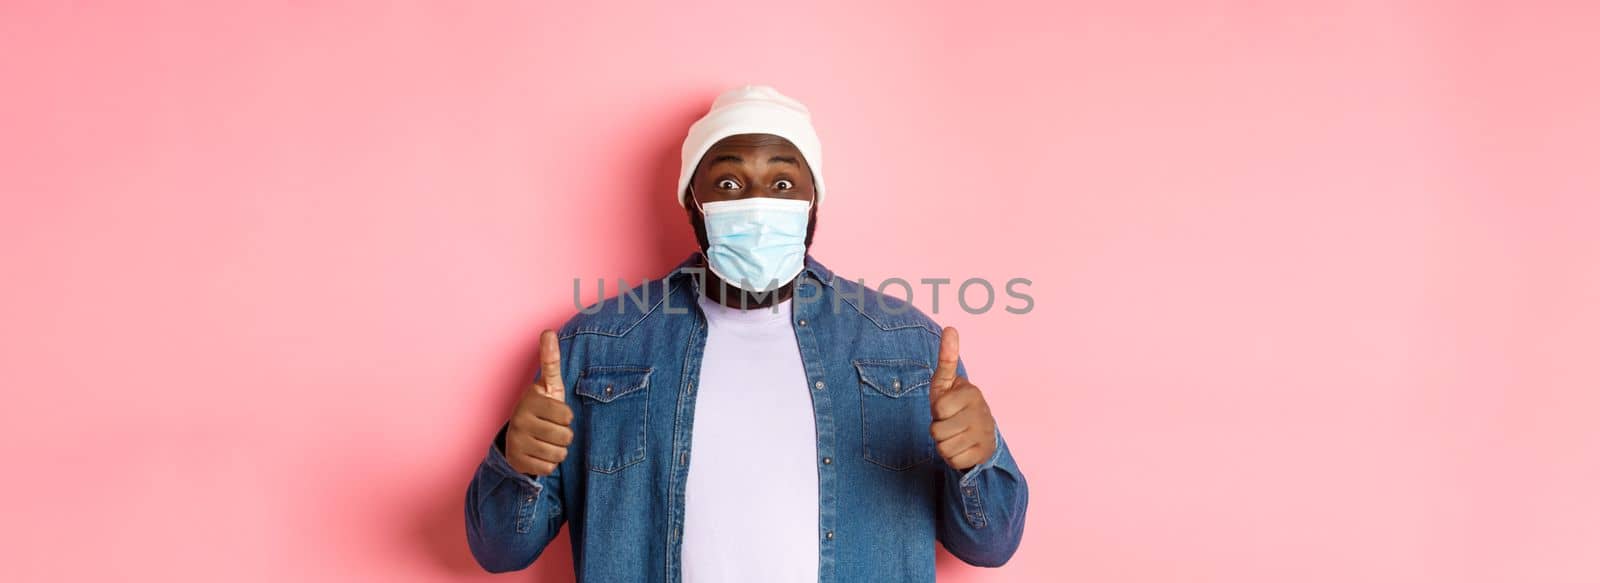 Covid-19, lifestyle and quarantine concept. Satisfied Black man in face mask showing thumbs-up, standing over pink background.